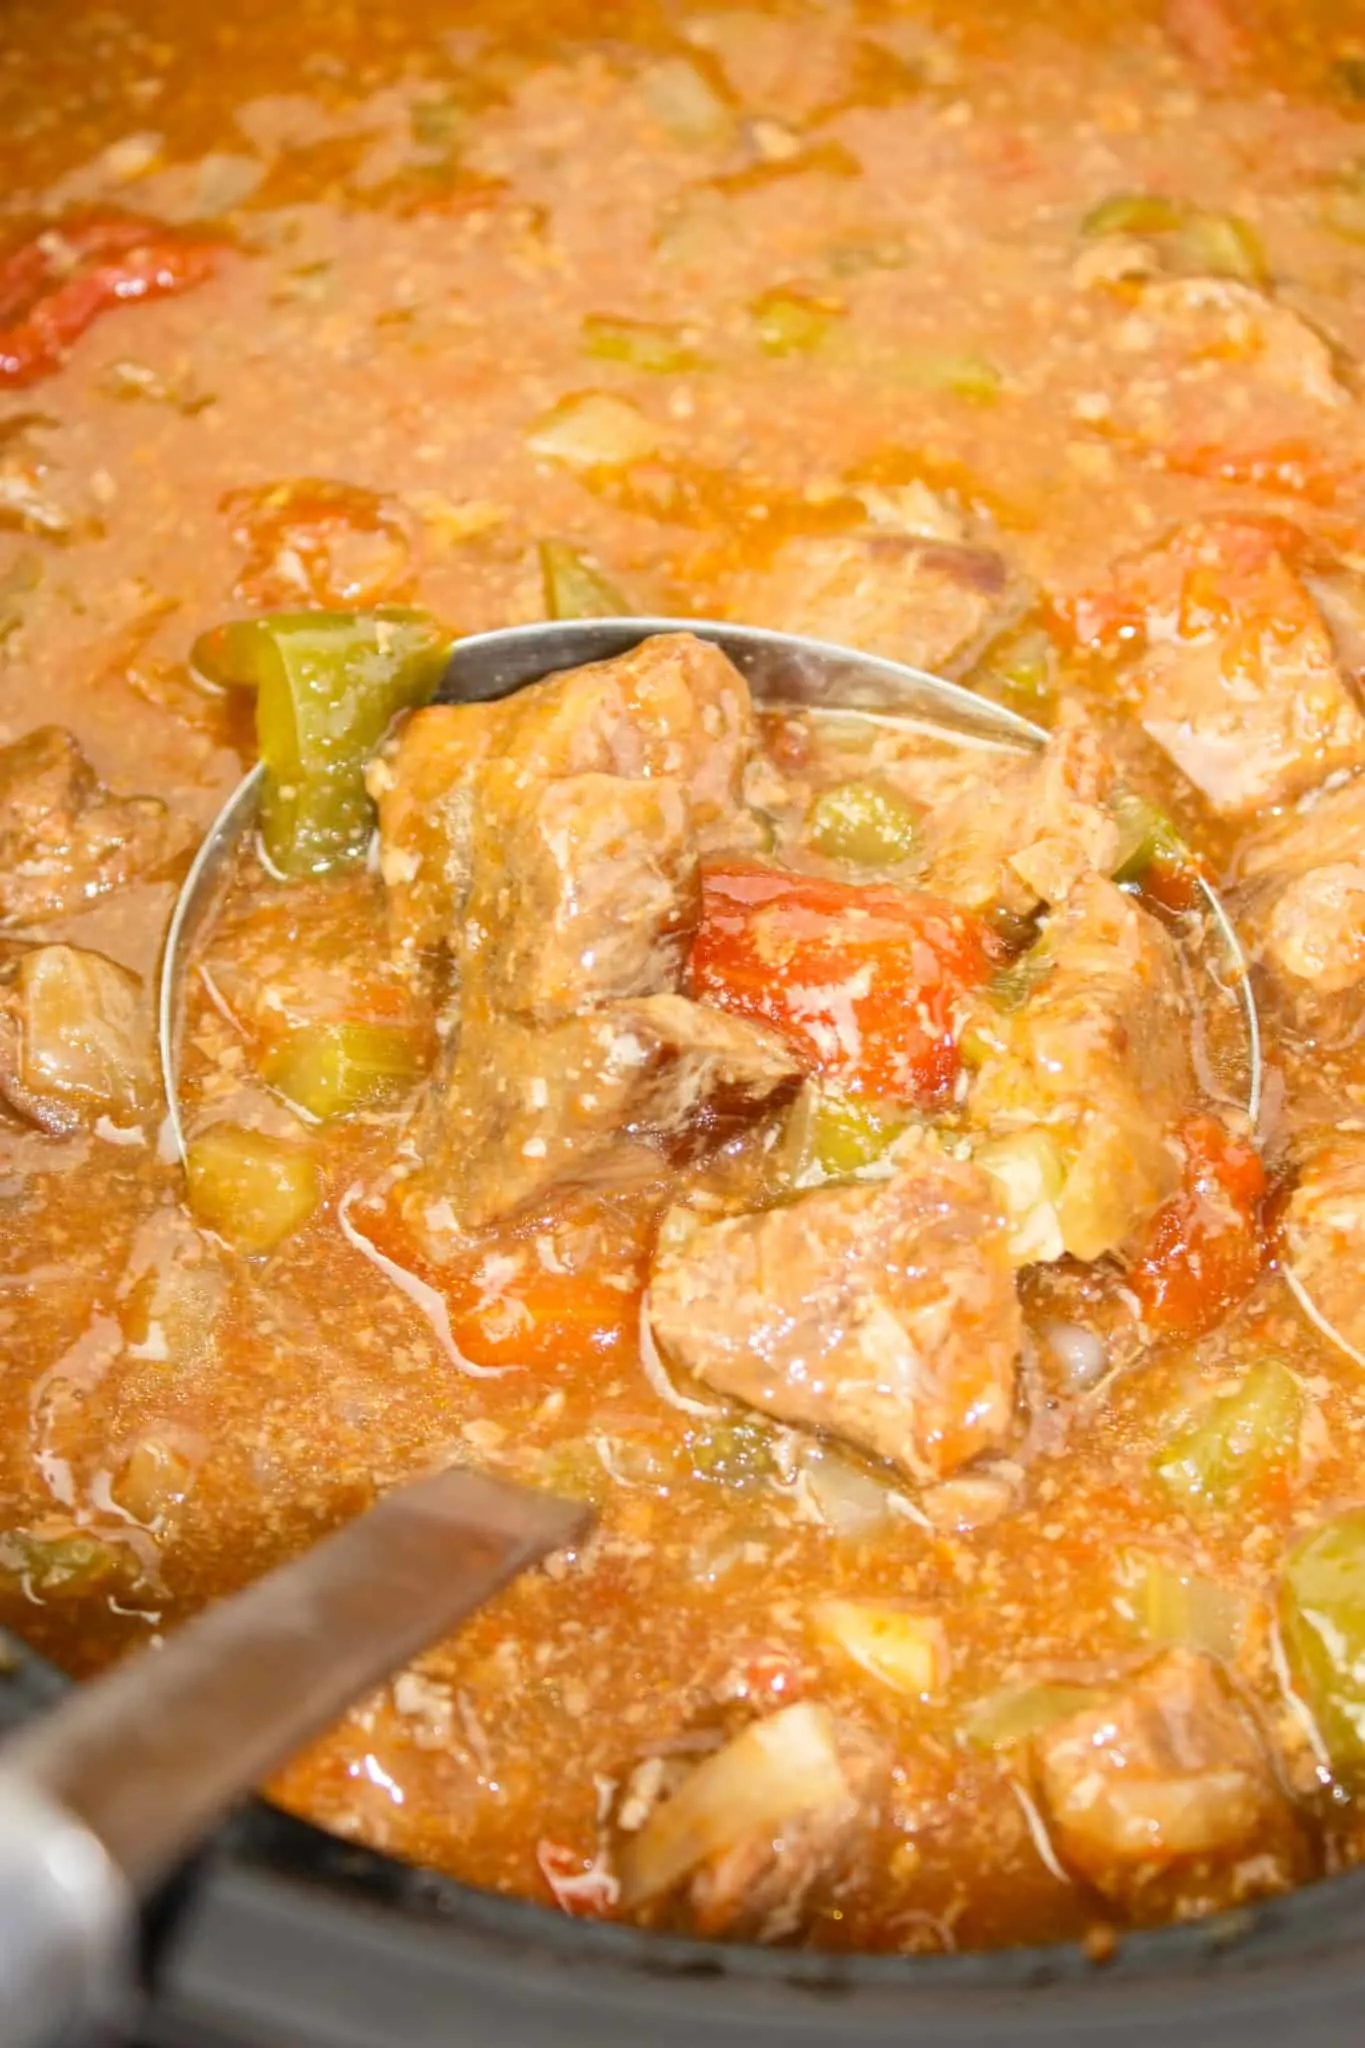 Crock Pot Tangy Beef is a tasty slow cooker recipe.  Chunks of stewing beef and vegetables smothered in a tangy sauce make this a delicious choice on those cool evenings any time of the year.